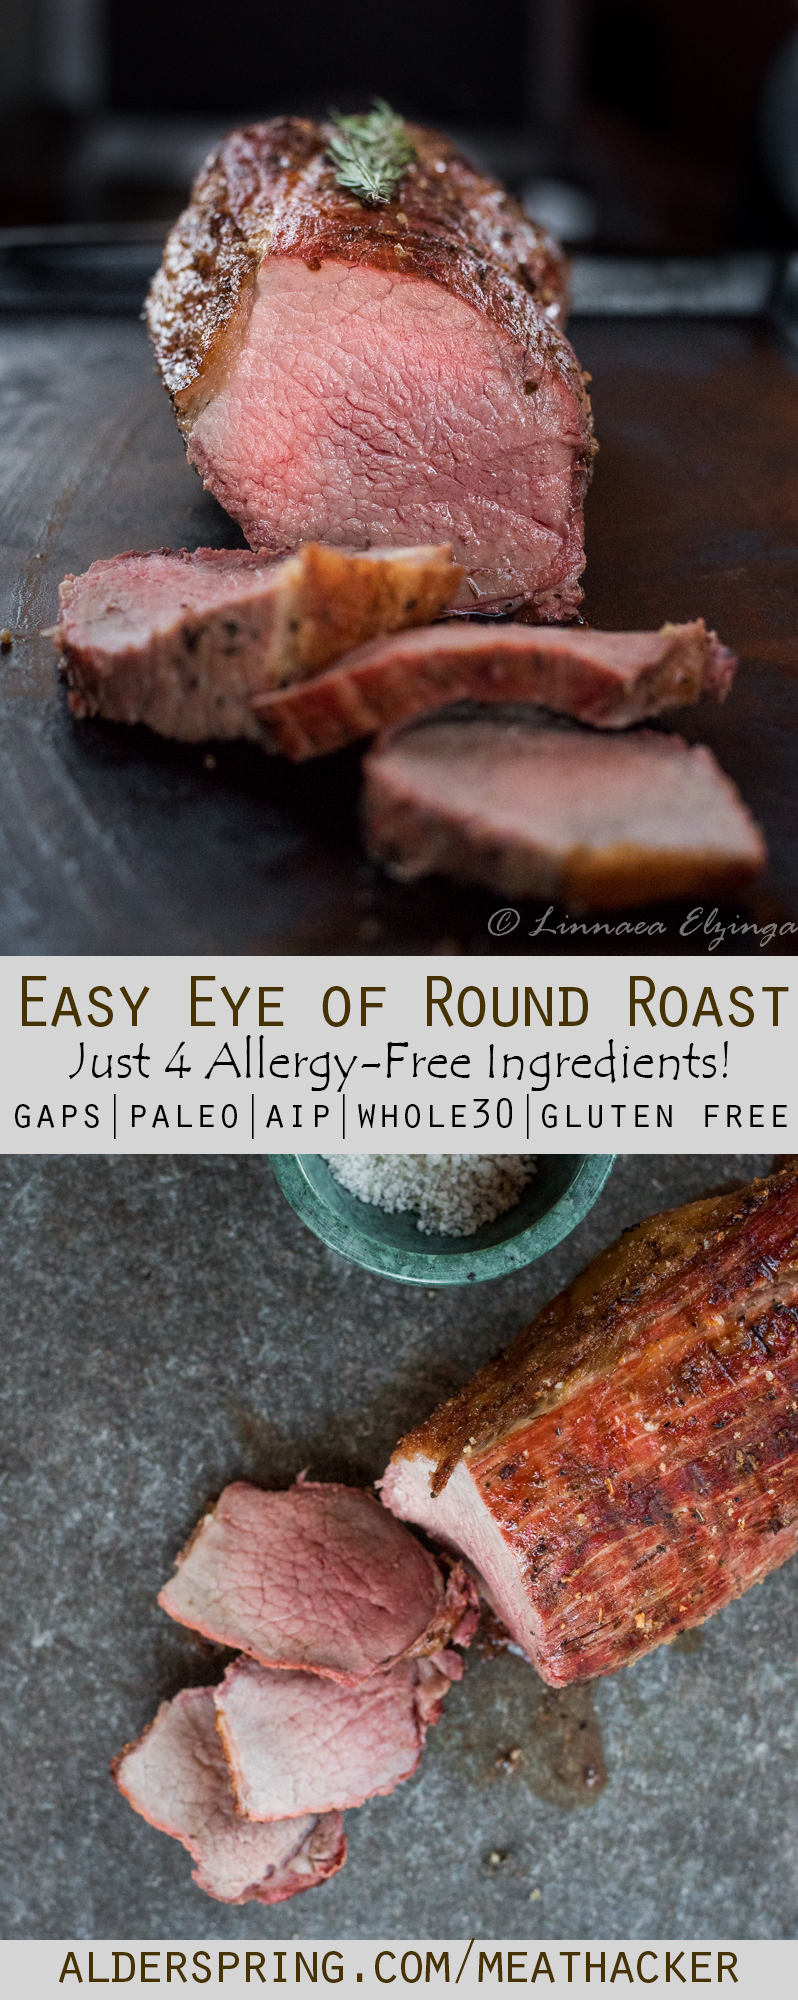 Simple 4-ingredient allergy-free recipe for properly cooking beef eye of the round roast!